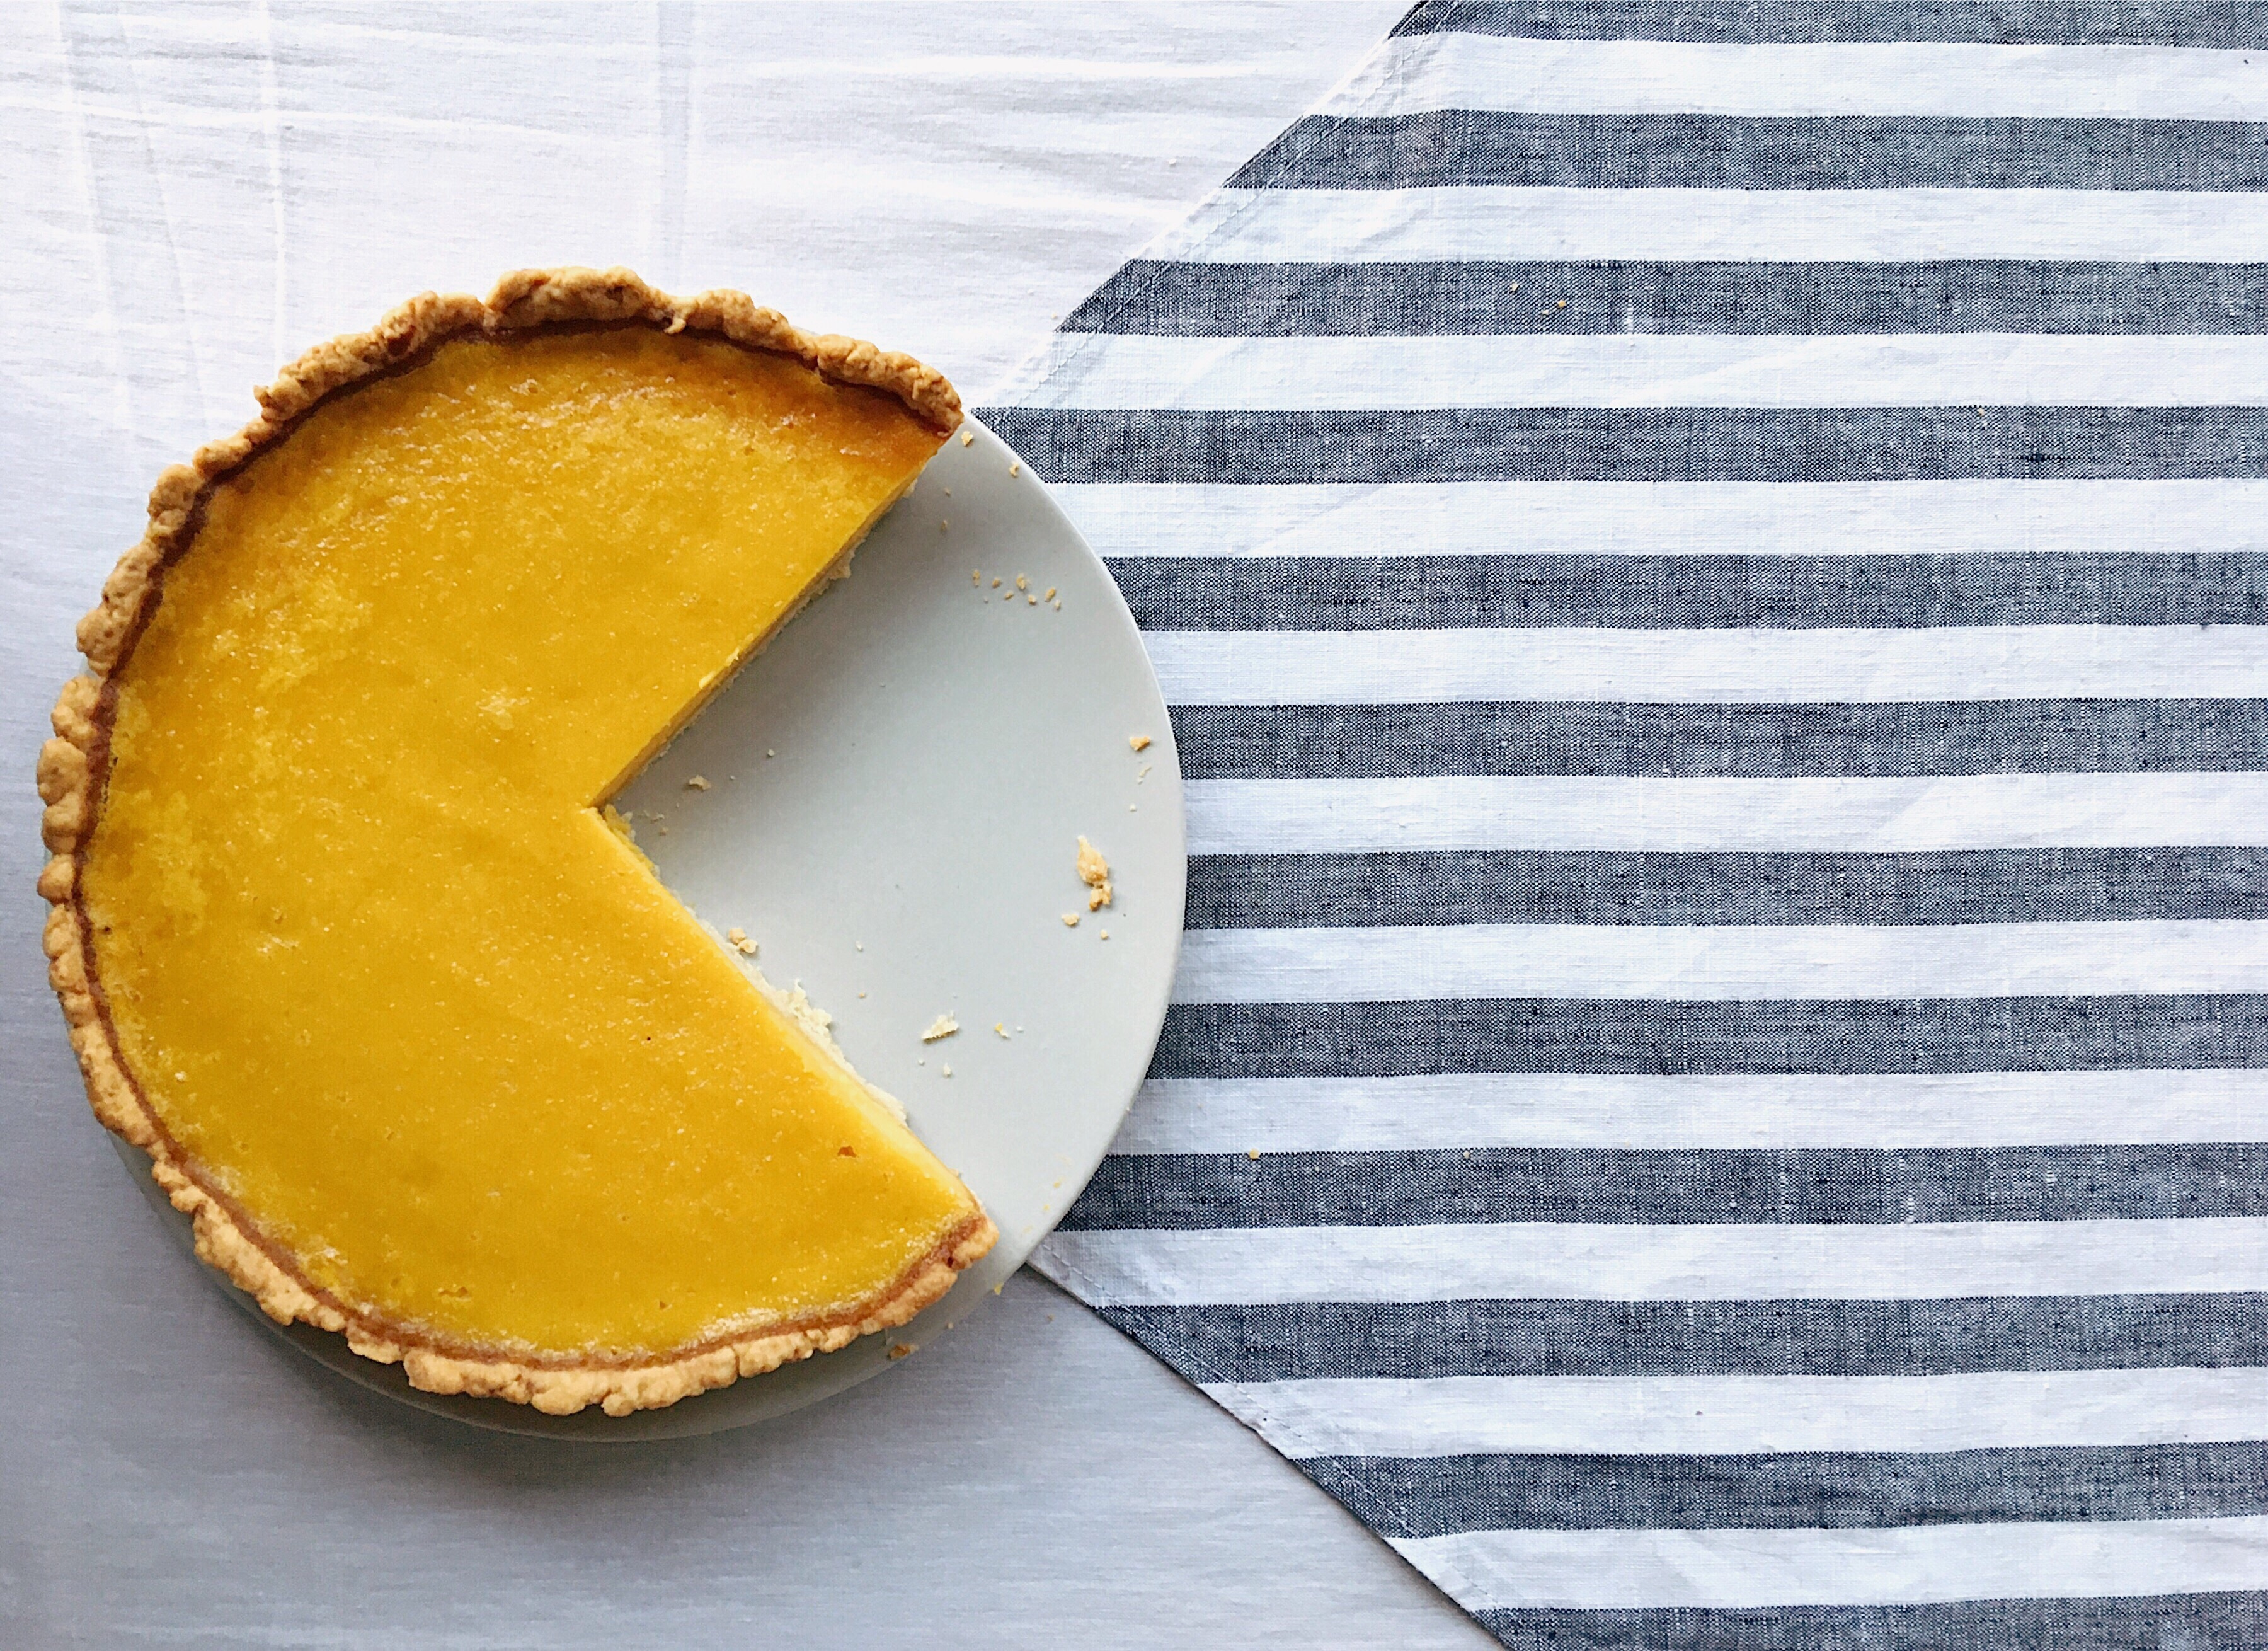 Pie on table with a slice cut out; usage-based billing